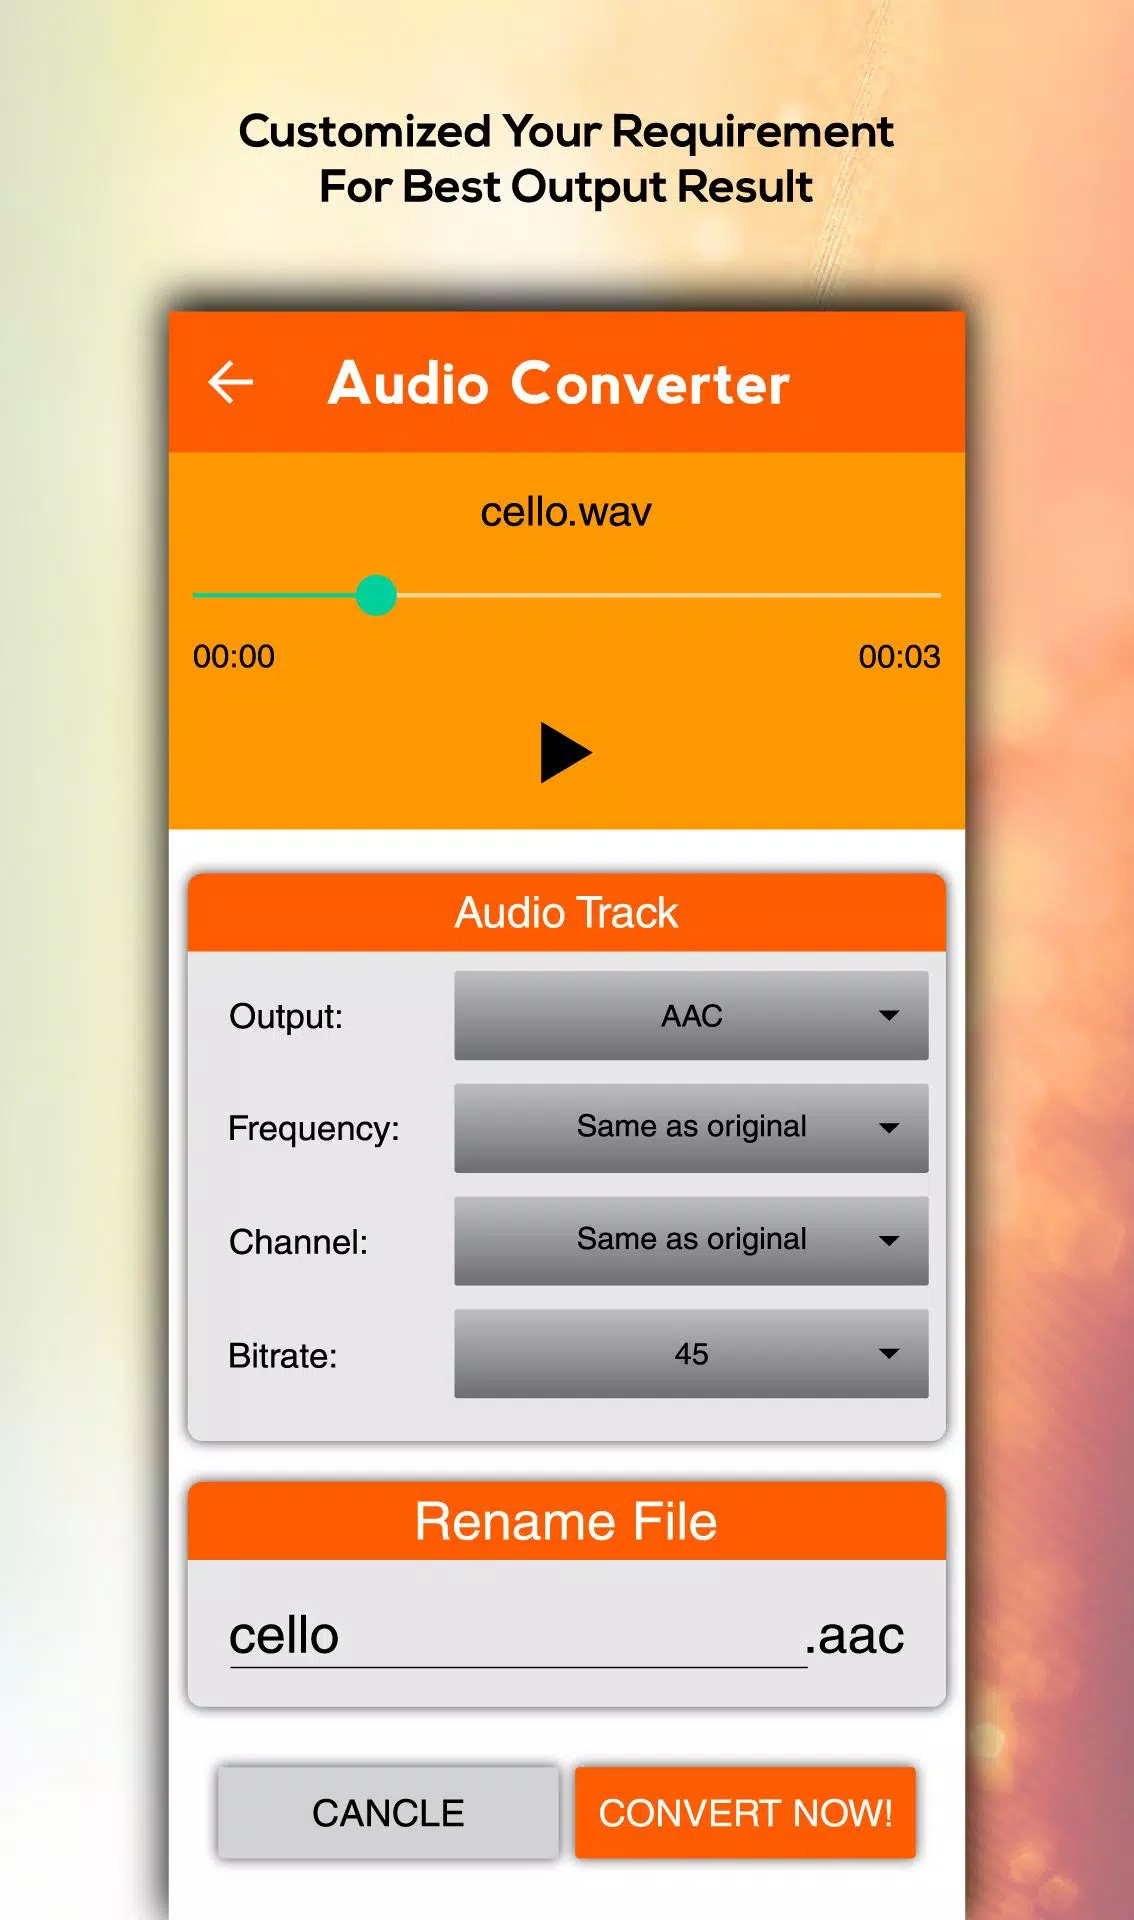 All Audio Converter – MP3, AAC, WAV, M4A, AAC for Android - APK Download